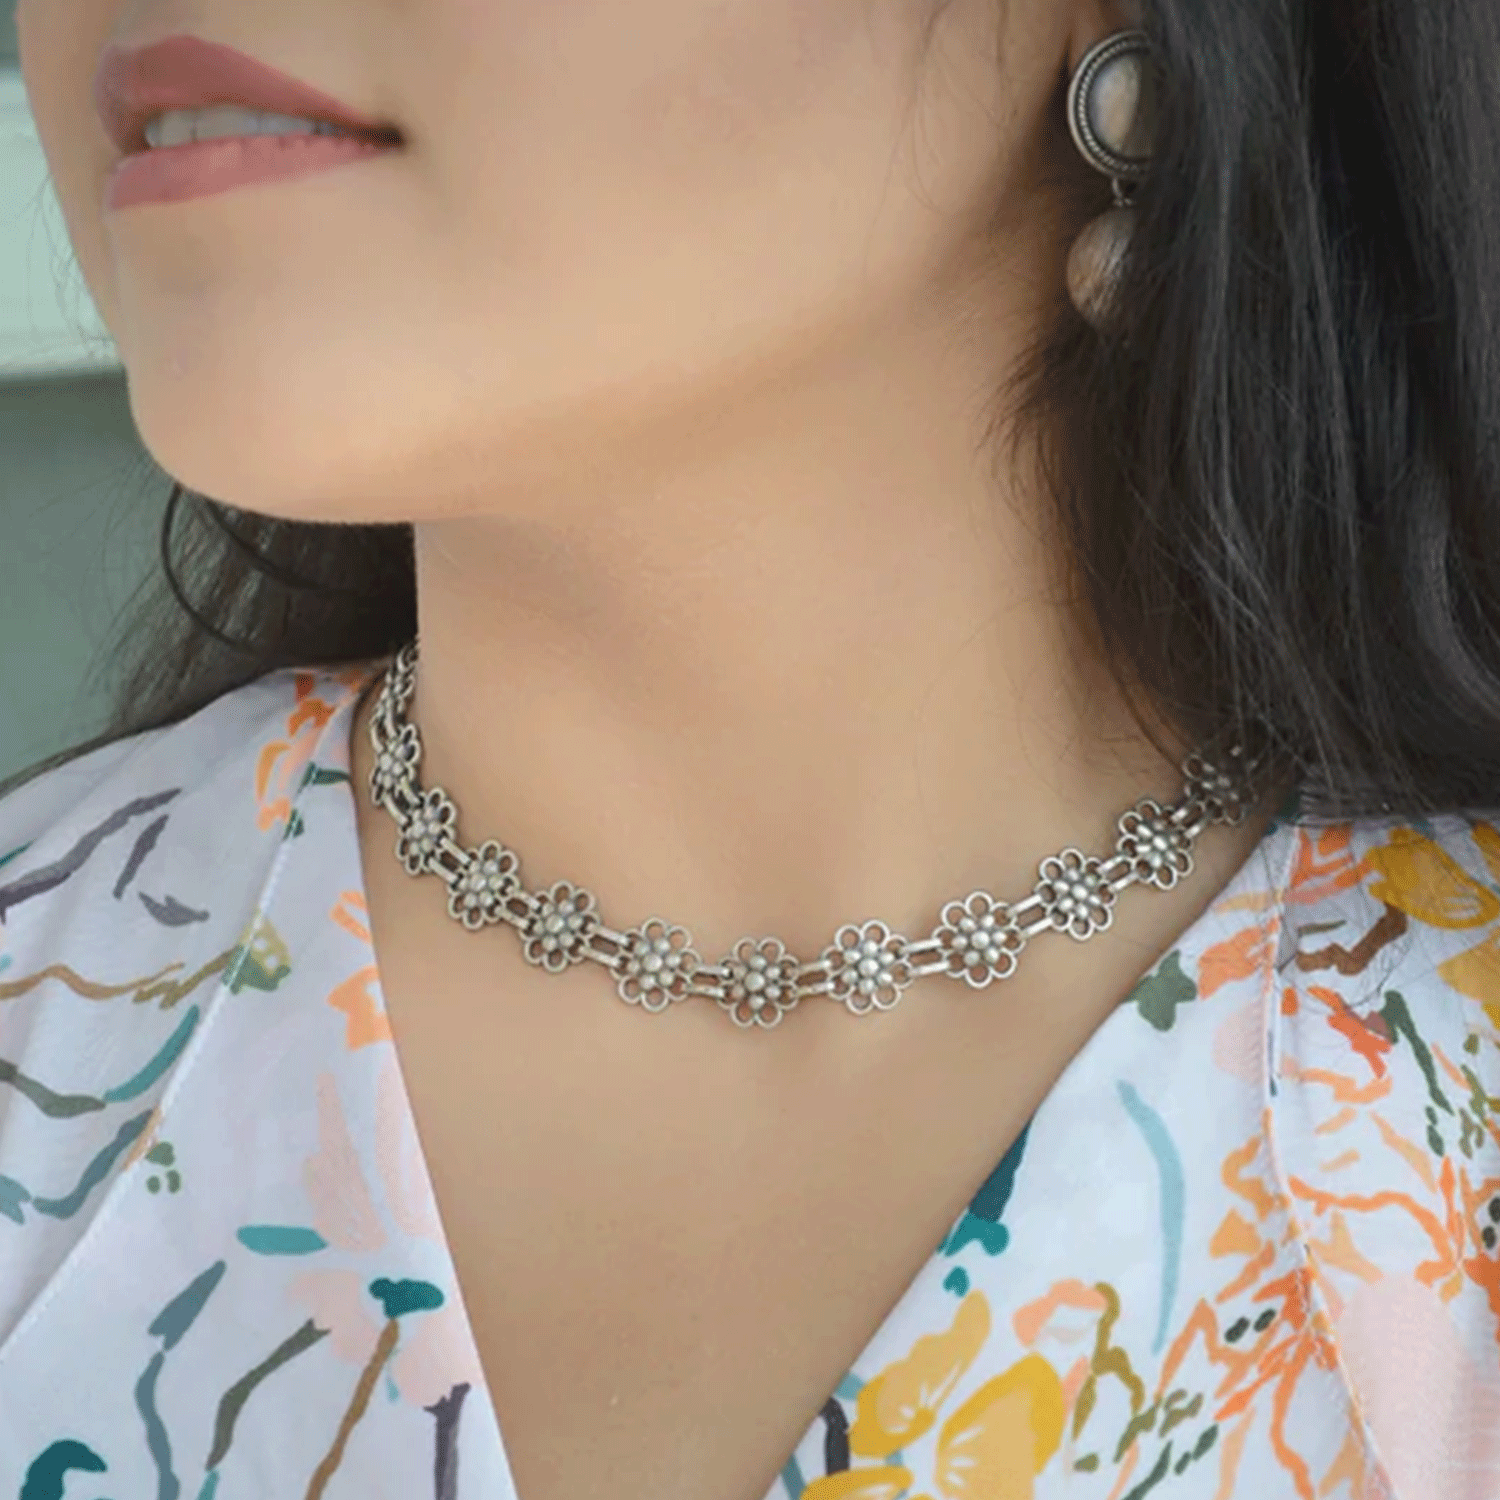 Rosette Choker: Shop The Trend Everyone Is Hopping On